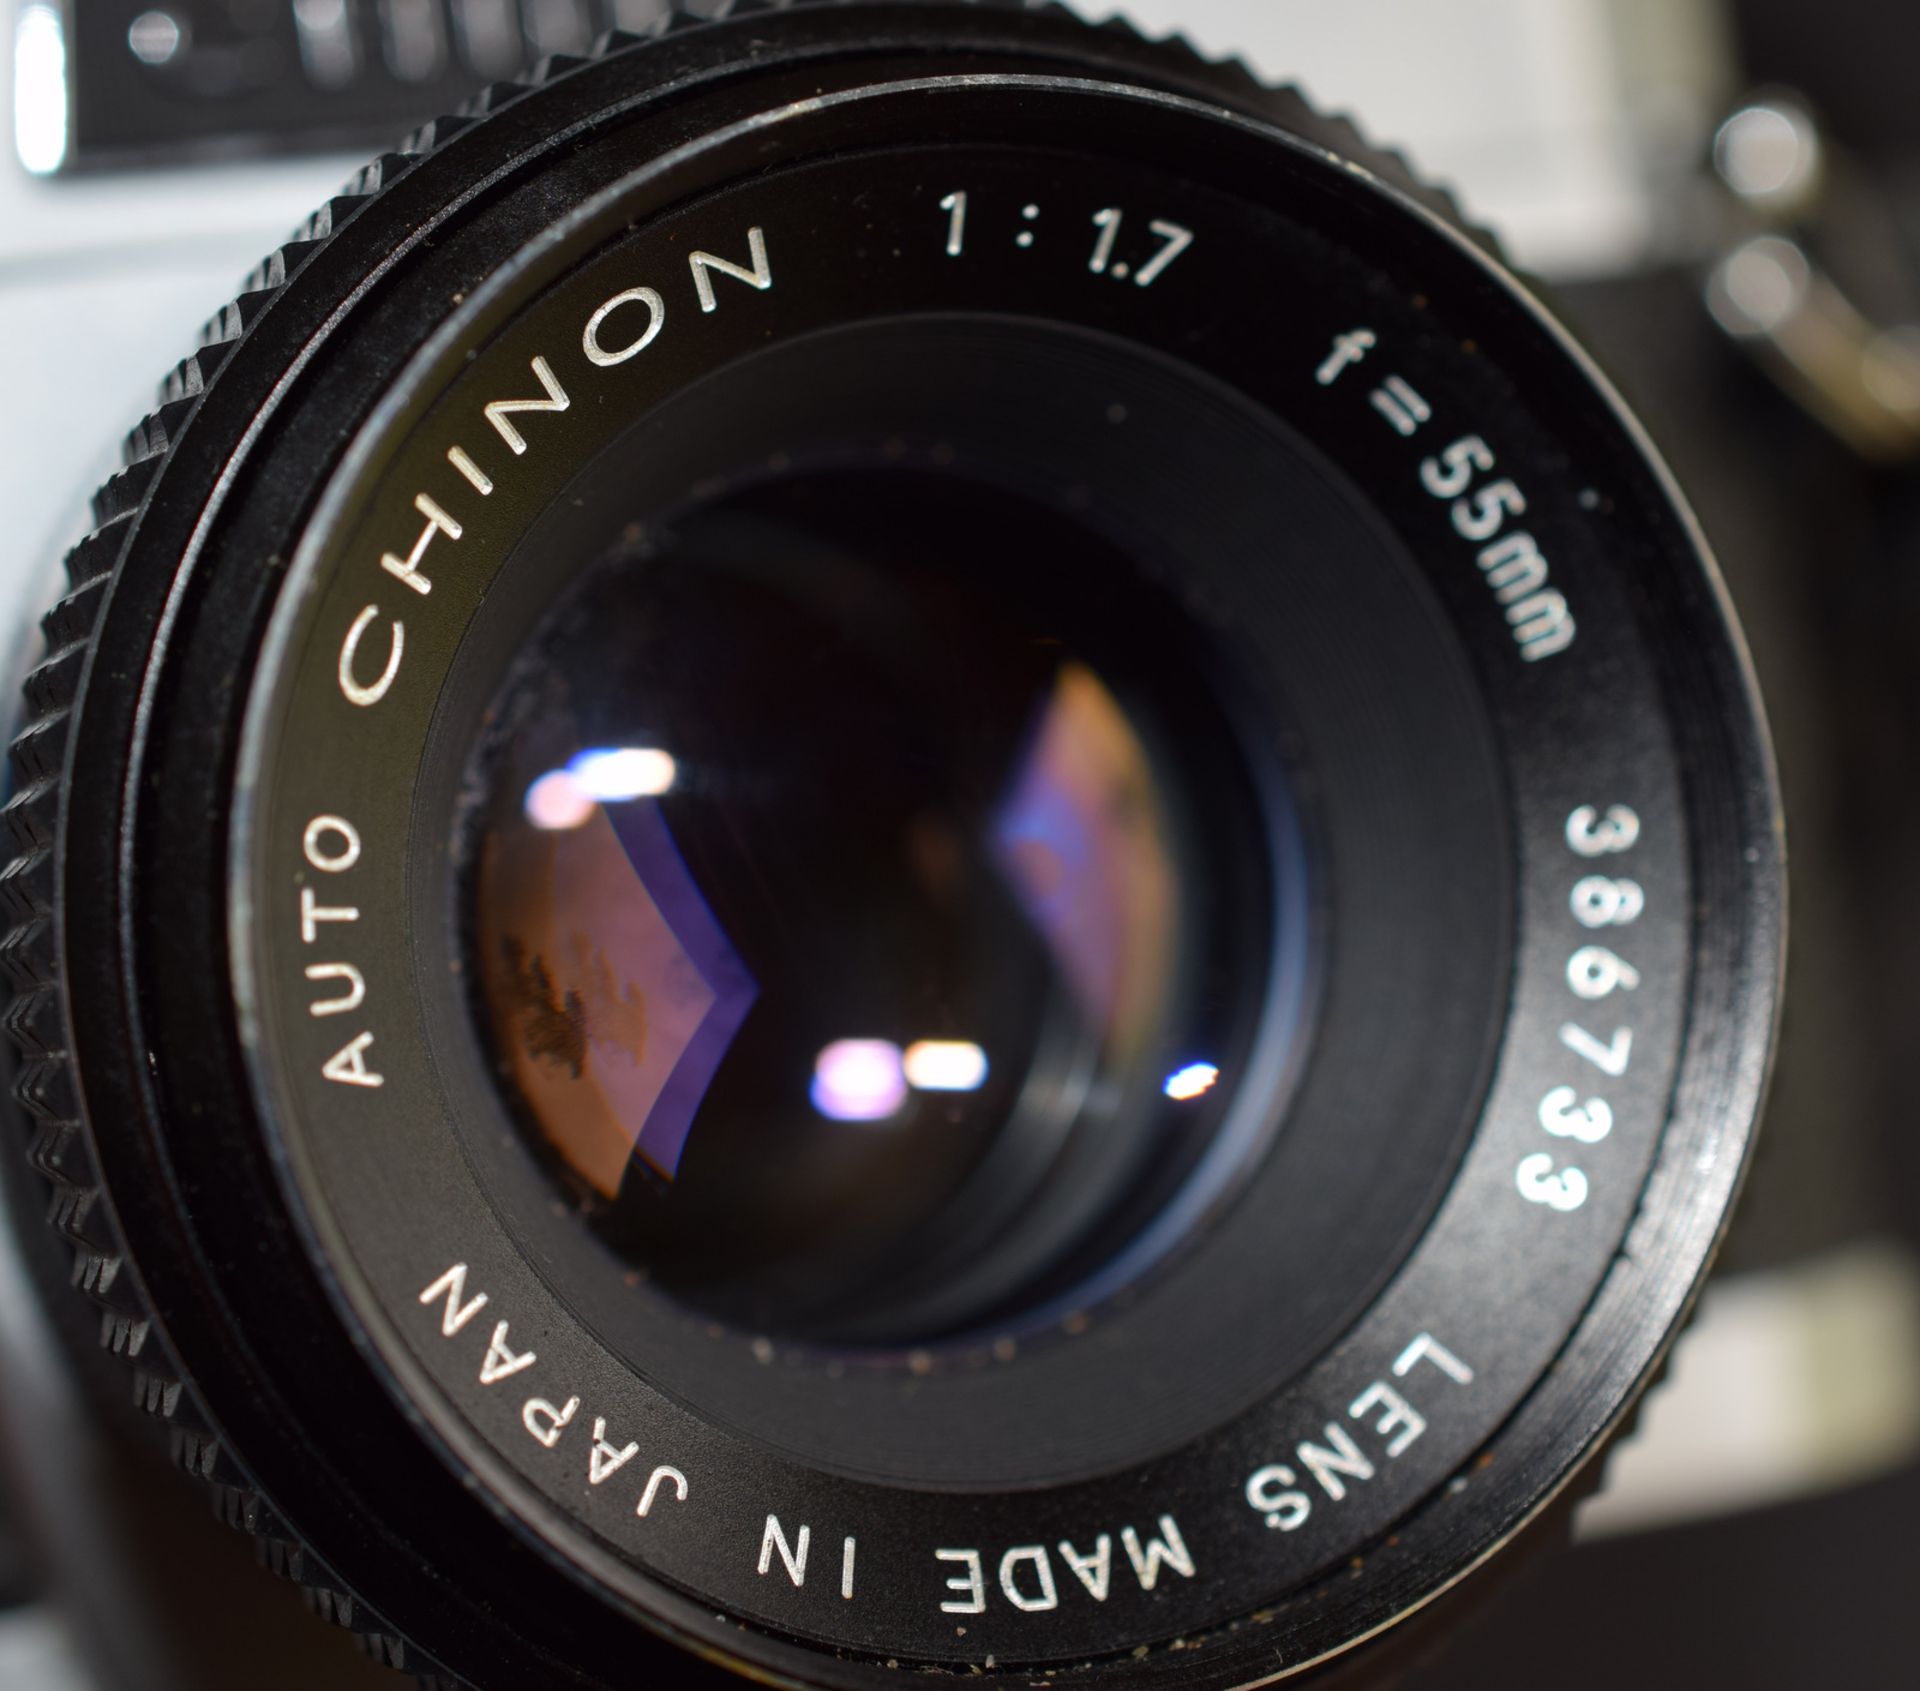 Vintage 35Mm Chinon Cx11 Camera And Lens - Image 2 of 3